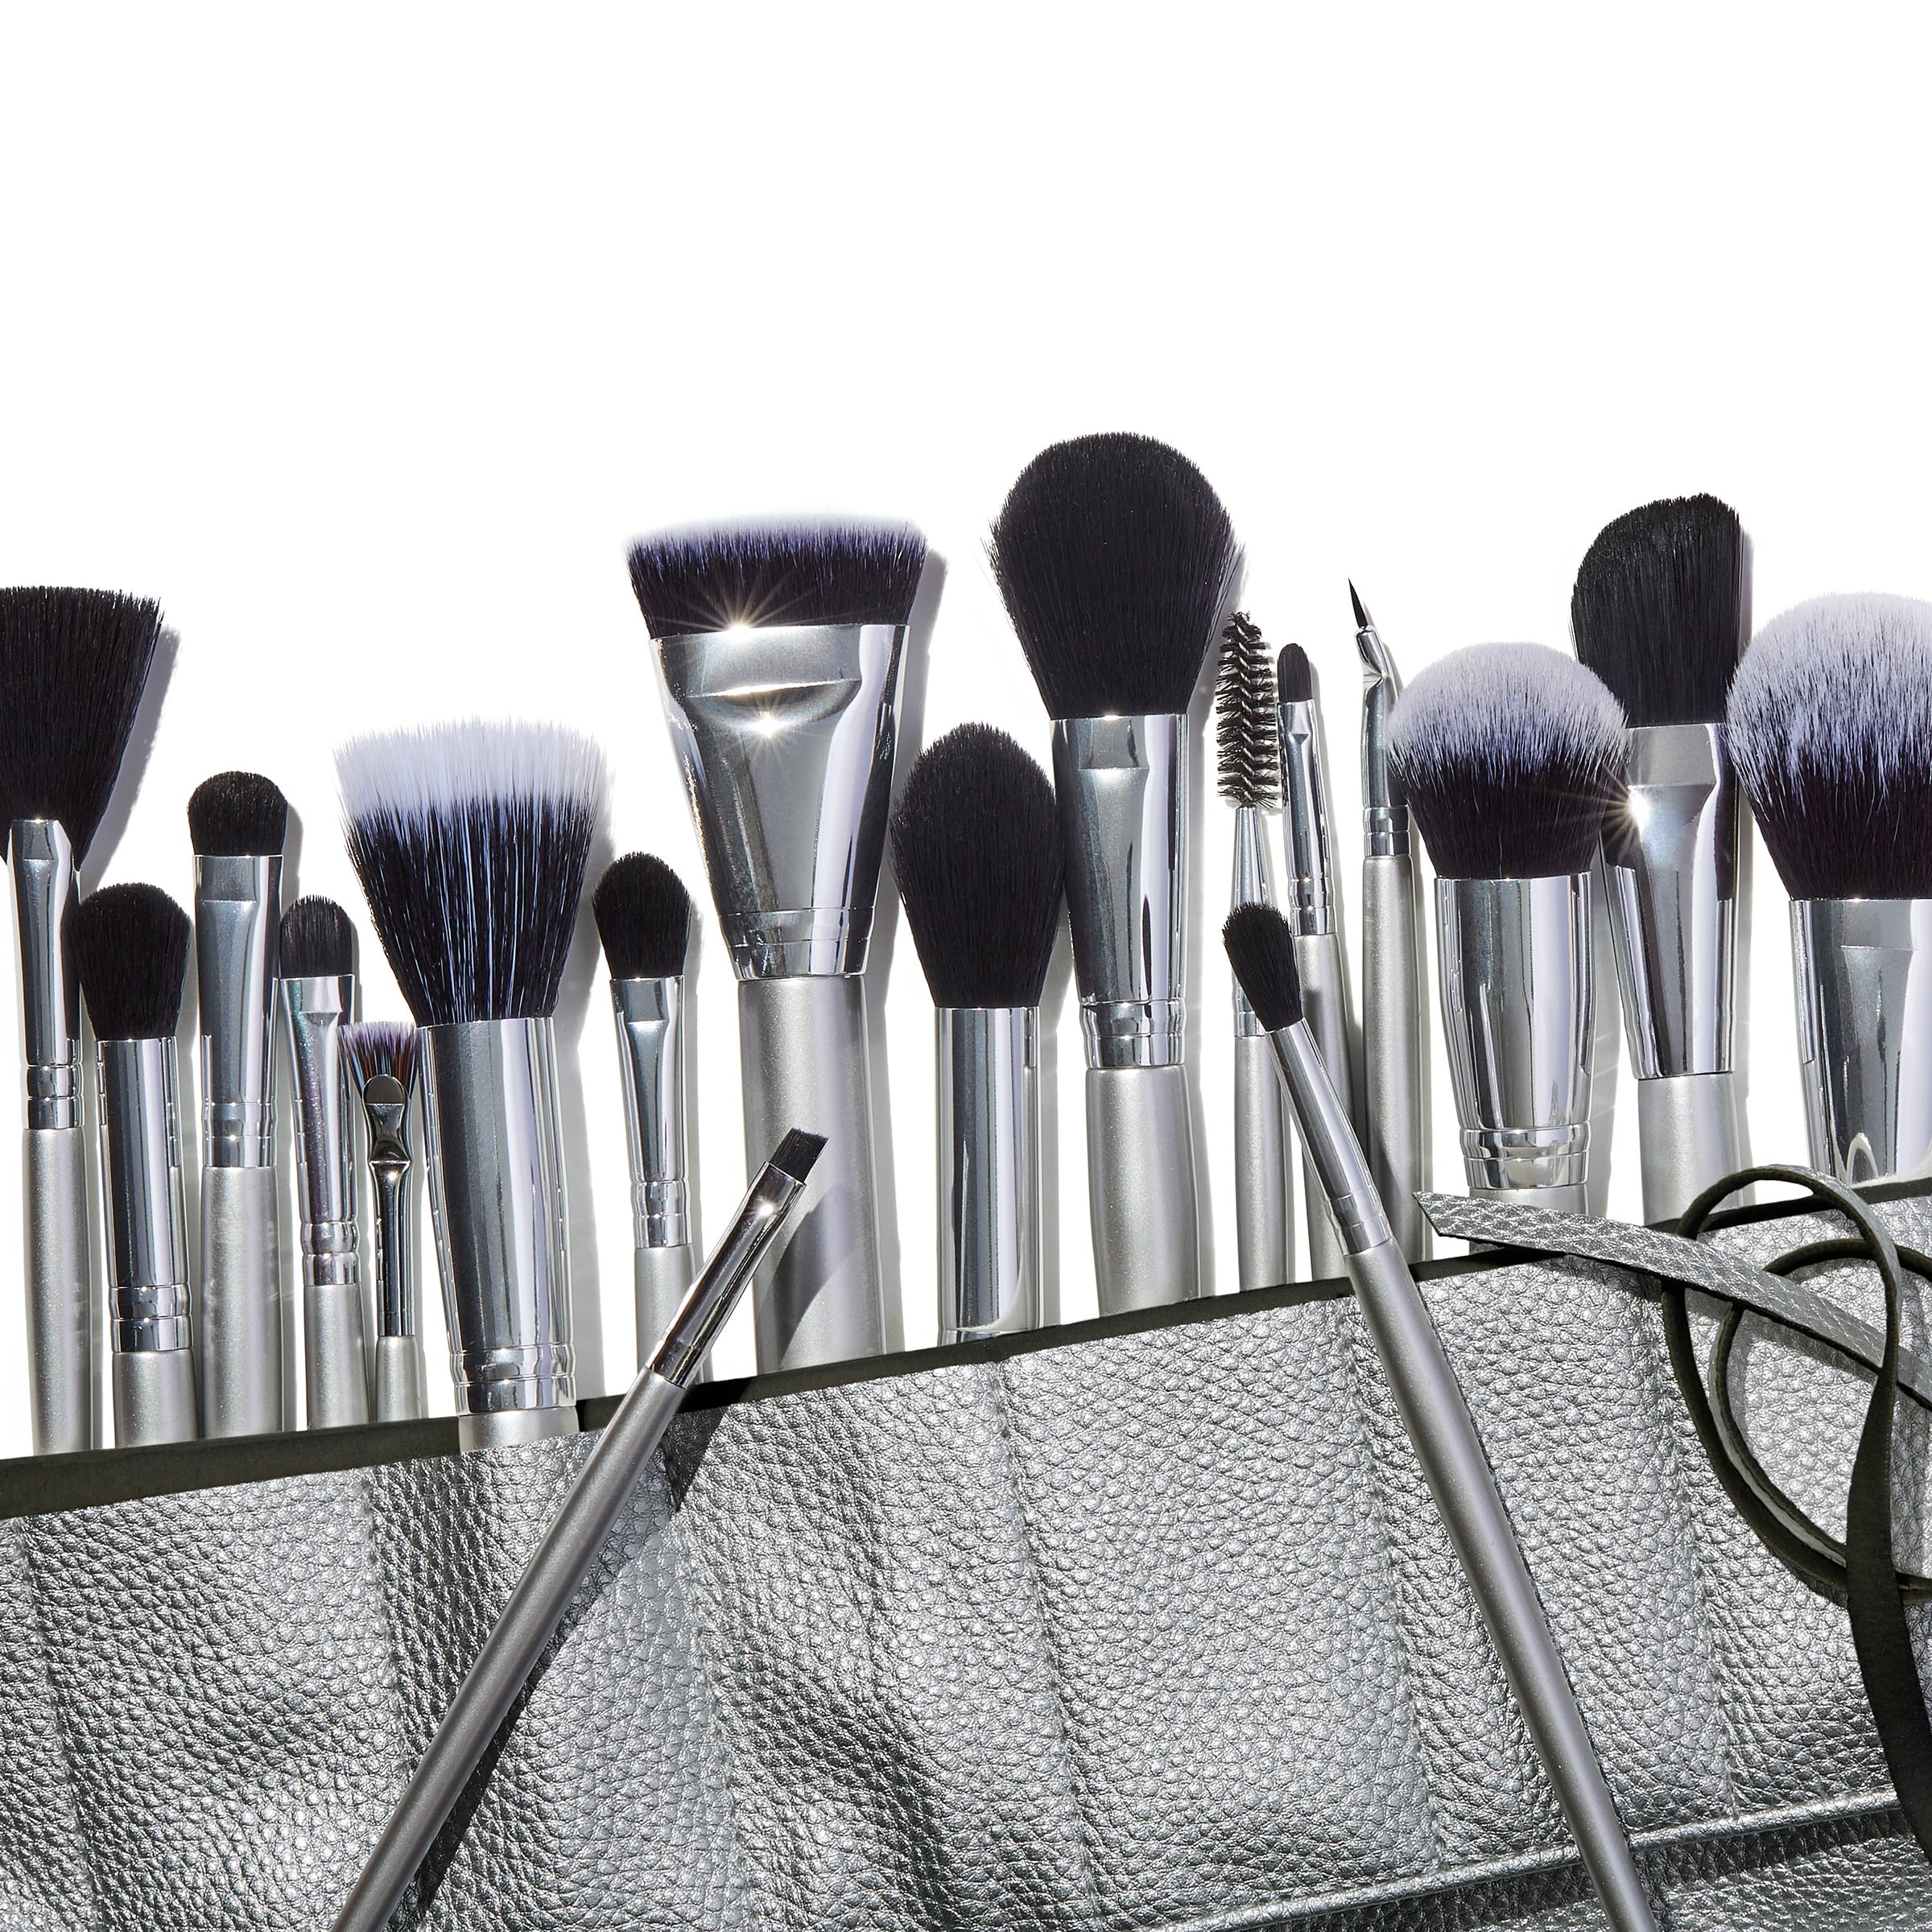 This Site Sells $1 Makeup Brushes You'll Be Obsessed With